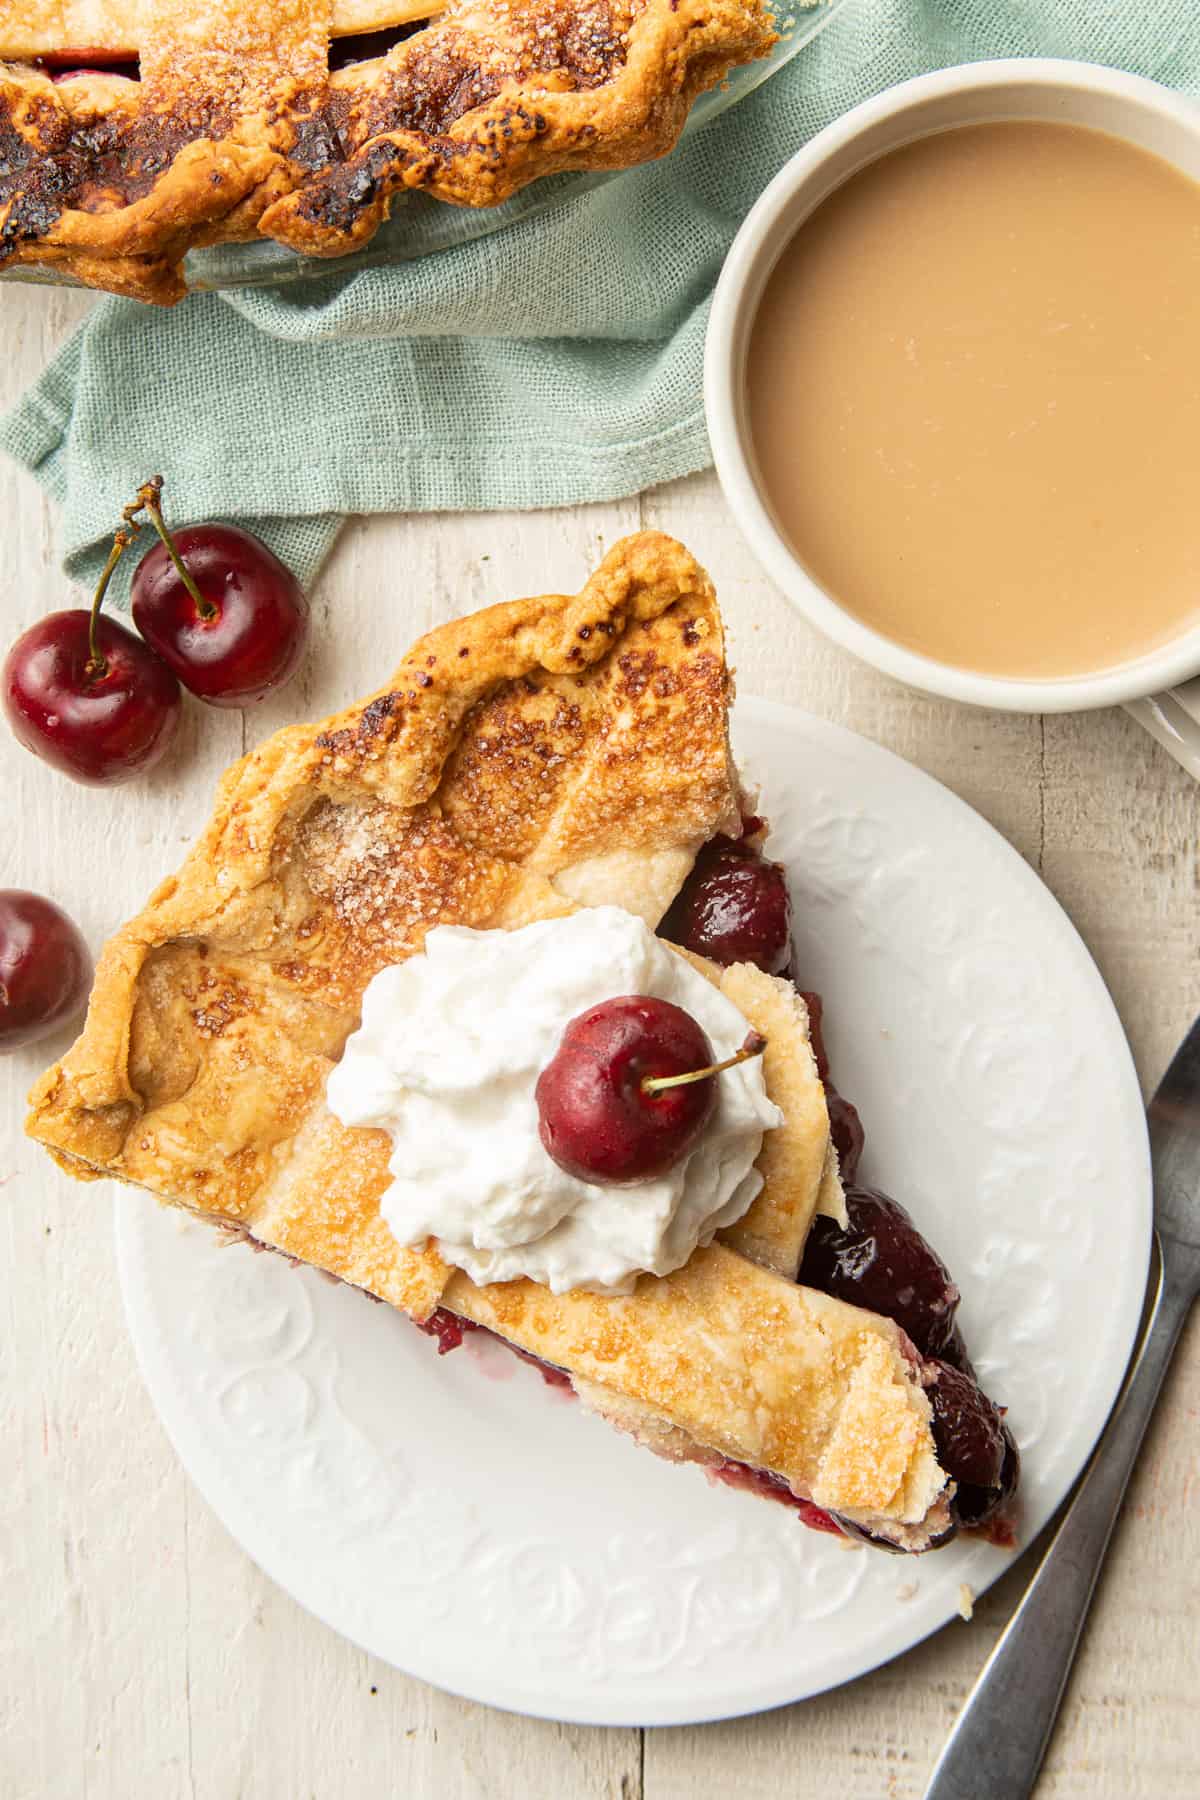 White wooden surface set with cup of coffee and slice of Vegan Cherry Pie on a plate.